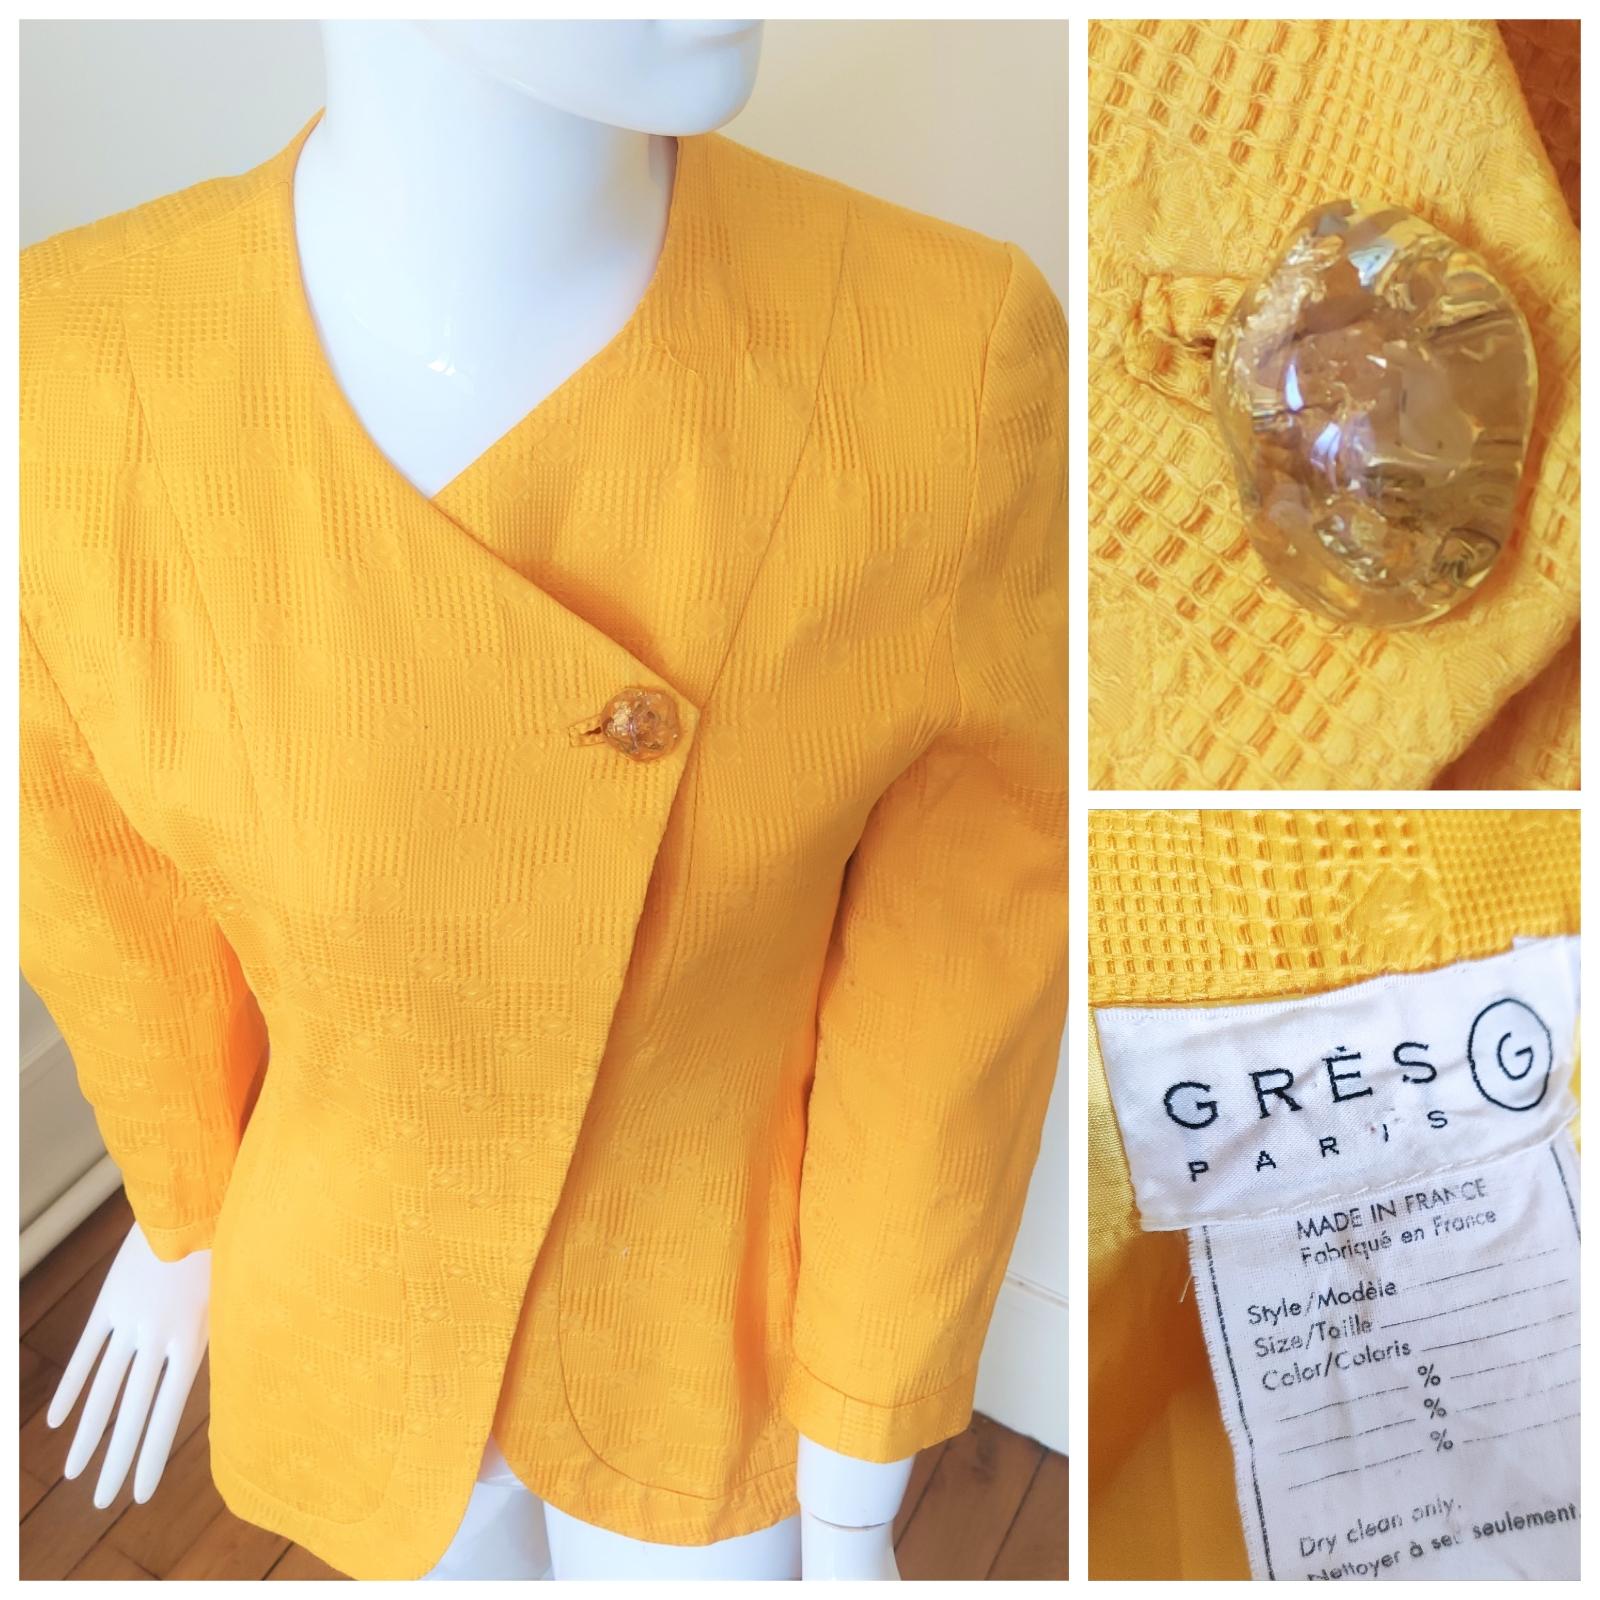 Elegant jacket by Madame Gres!
With shoulder pads!
Button: amber look.

EXCELLENT condition.

SIZE
Large.
Marked size: FR40
Length: 69 cm / 27.1 inch
Bust: 42 cm / 16.5 inch
Waist: 38 cm / 14.9 inch
Shoulder to shoulder: 41 cm / 16.1 inch
Sleeve: 54